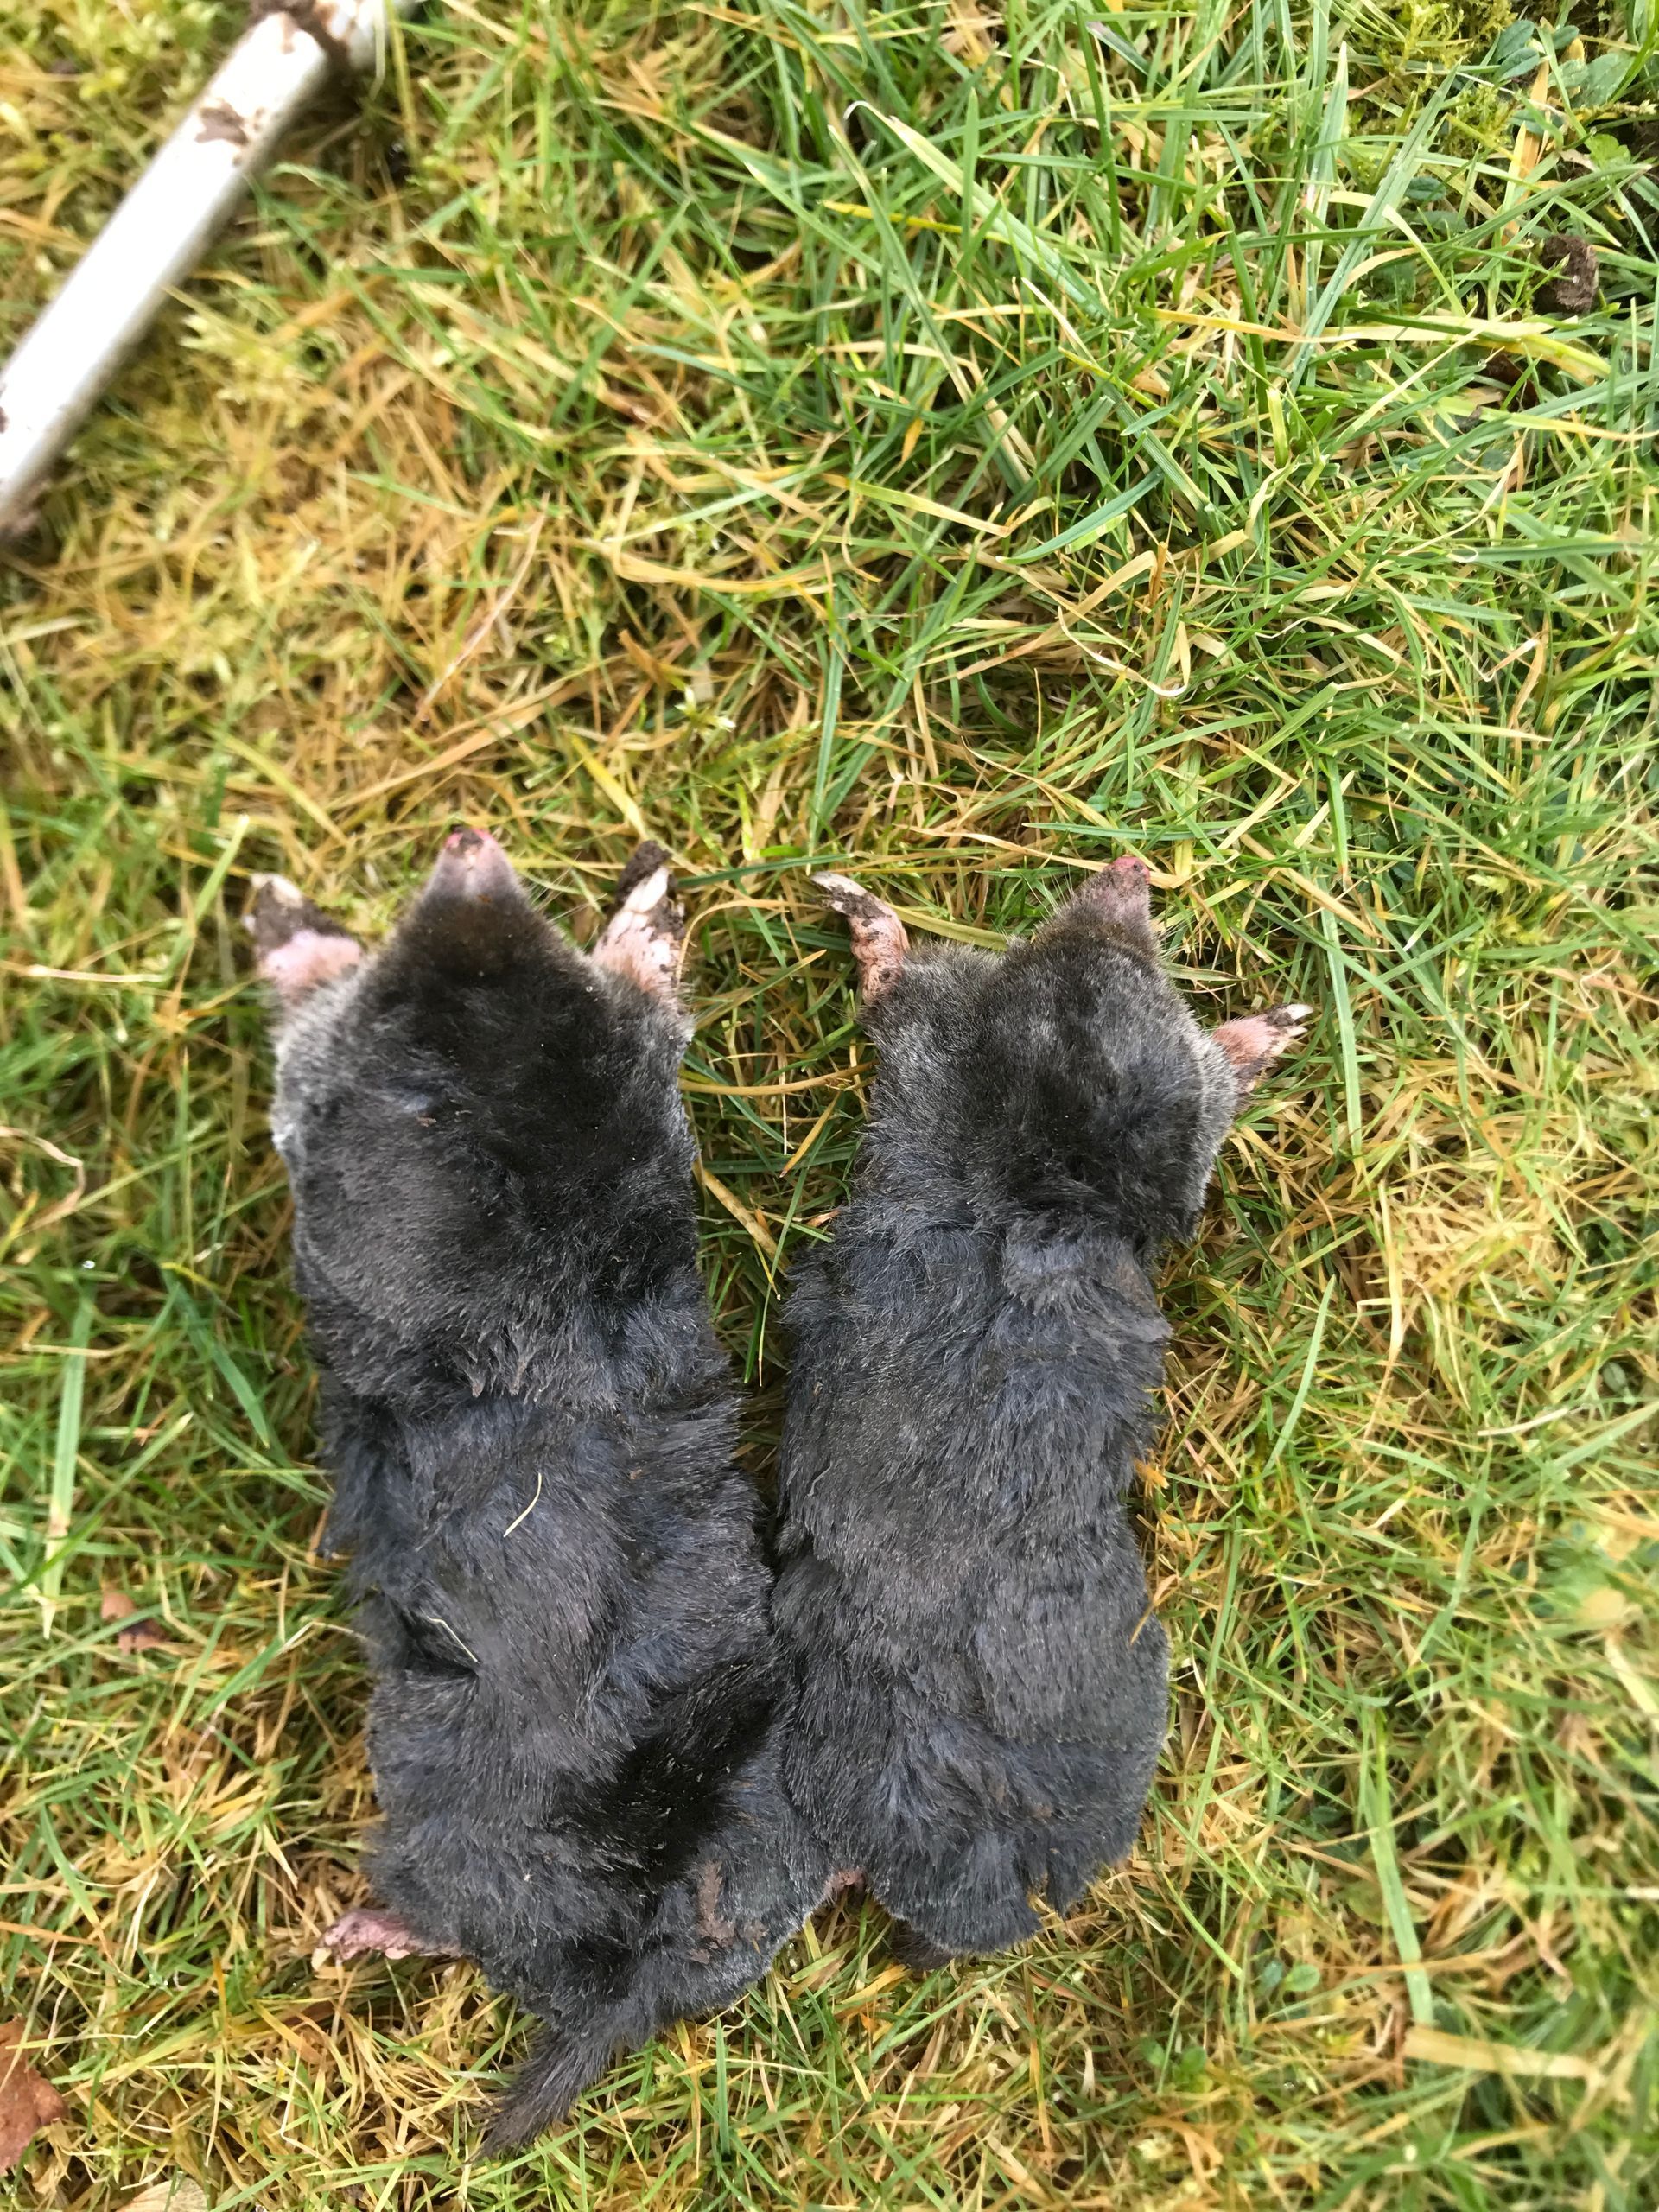 Mole trapping and mole clearance